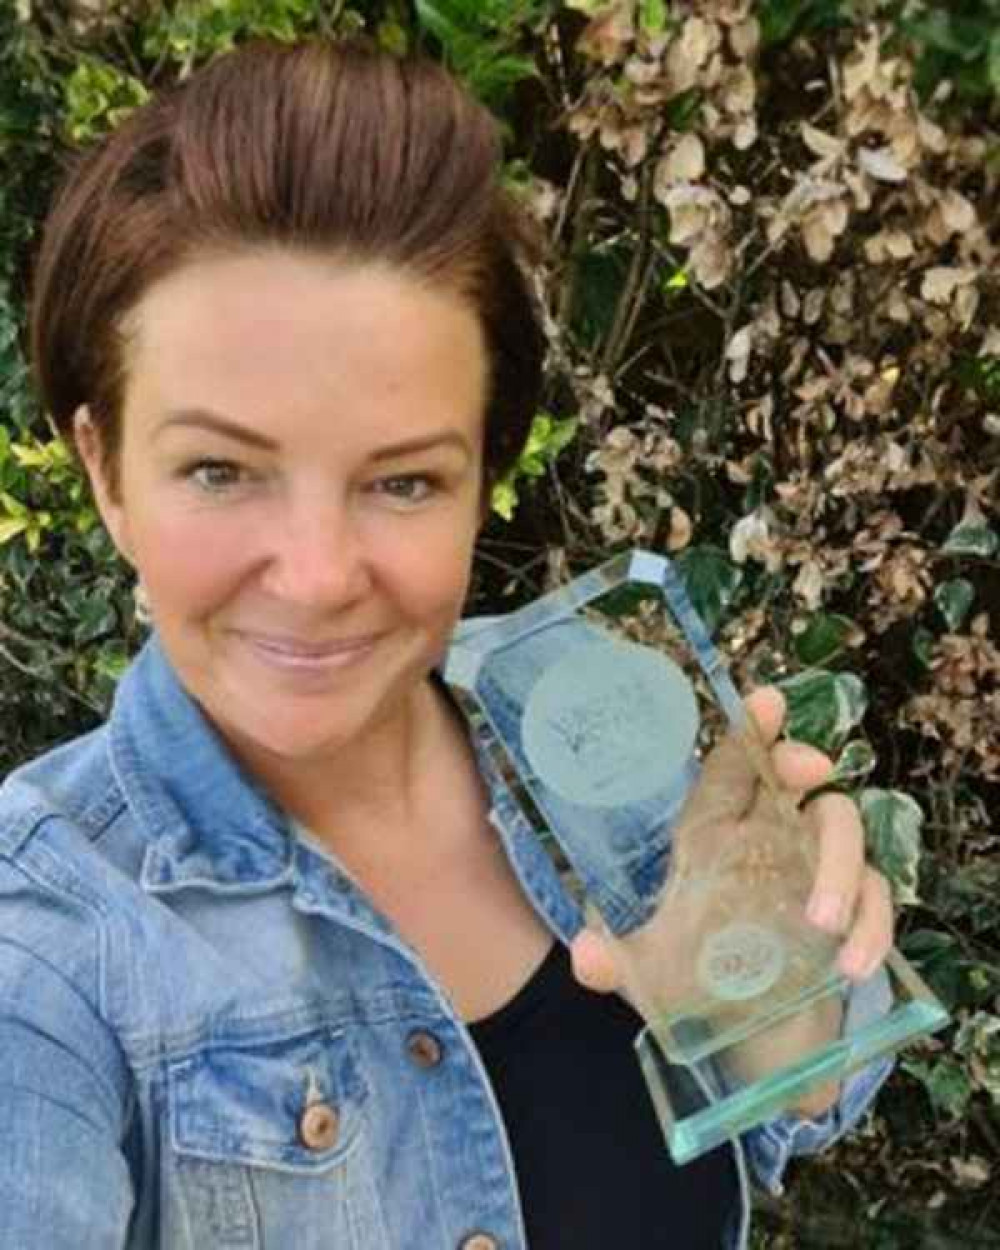 Shelly Stammers, of Tri-Hards, was thrilled to announce they had won 'The Devon Pride Awards 2020 for Community Sport' last month.